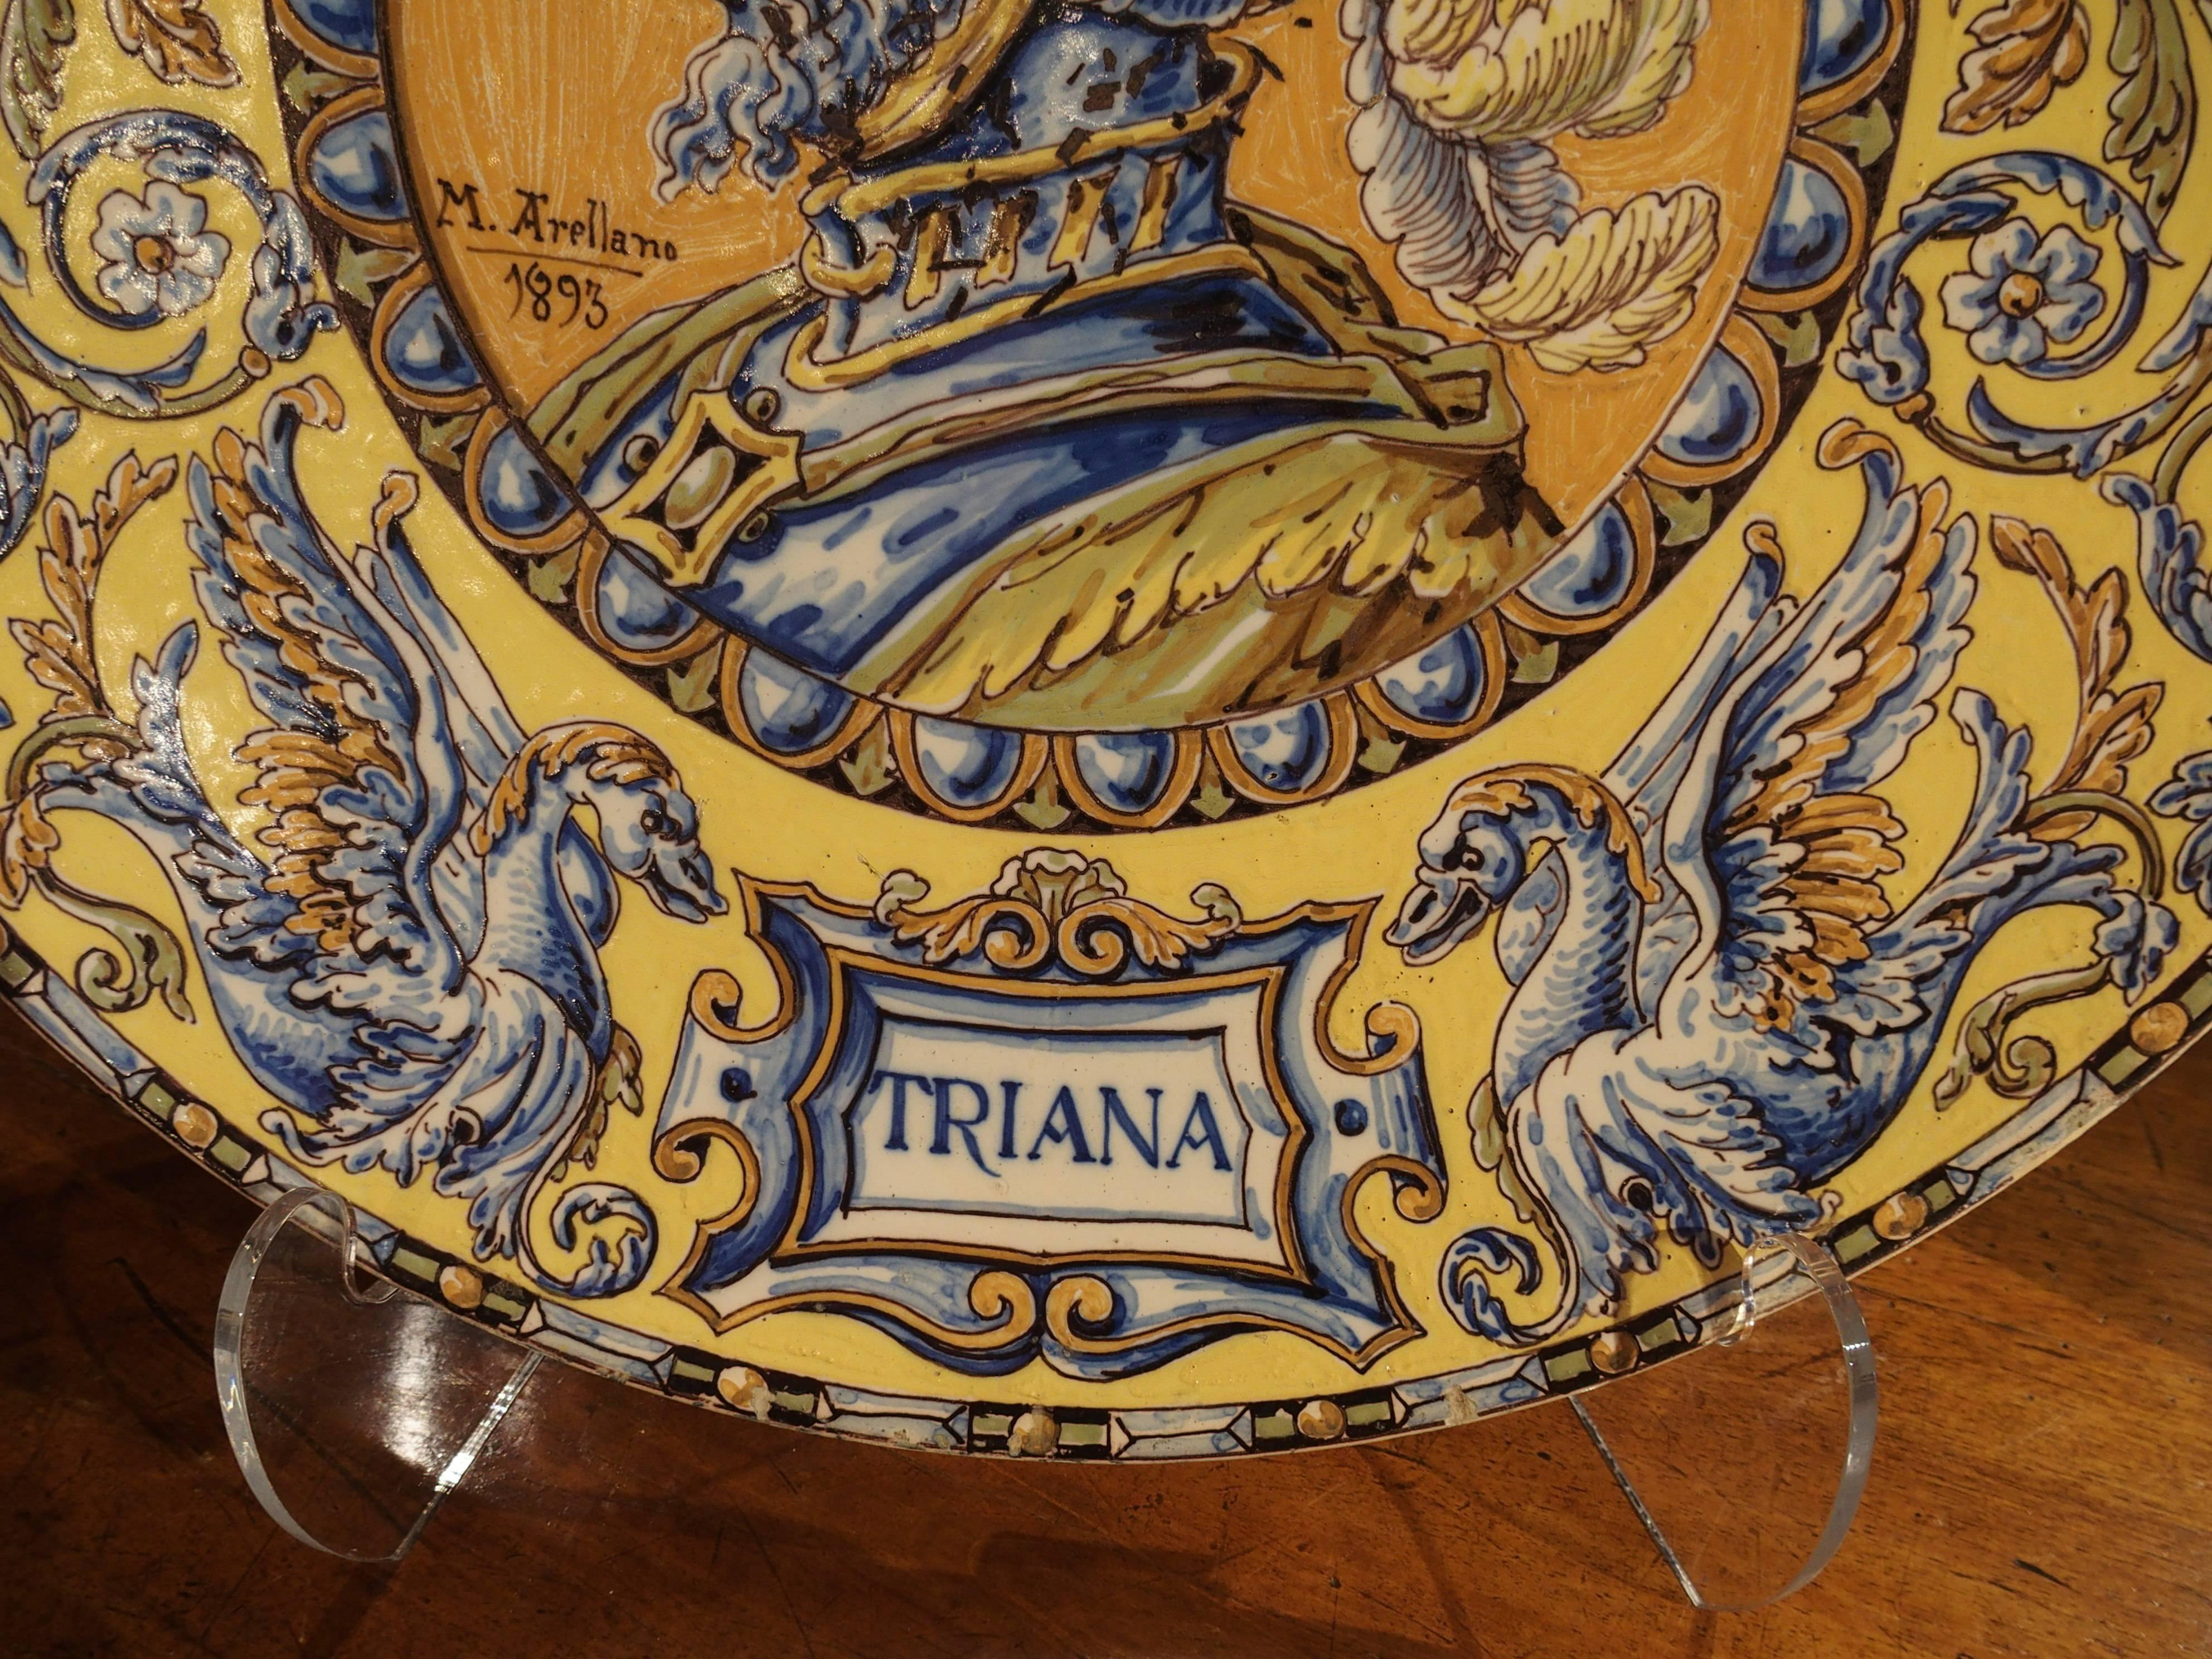 Pair of Signed 19th Century Spanish Plates from Triana 1